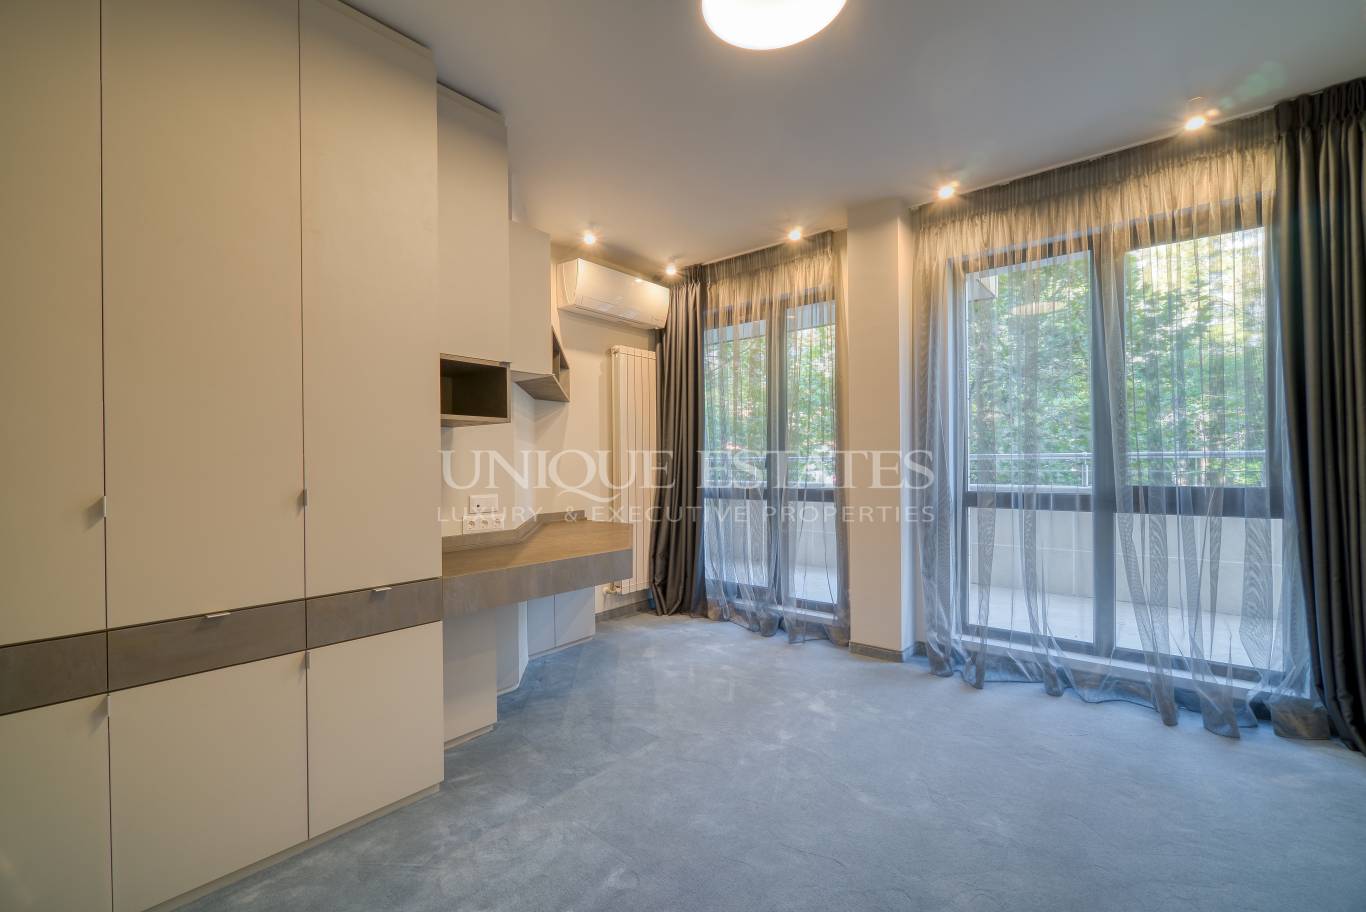 Apartment for rent in Sofia, Iztok with listing ID: K12030 - image 6